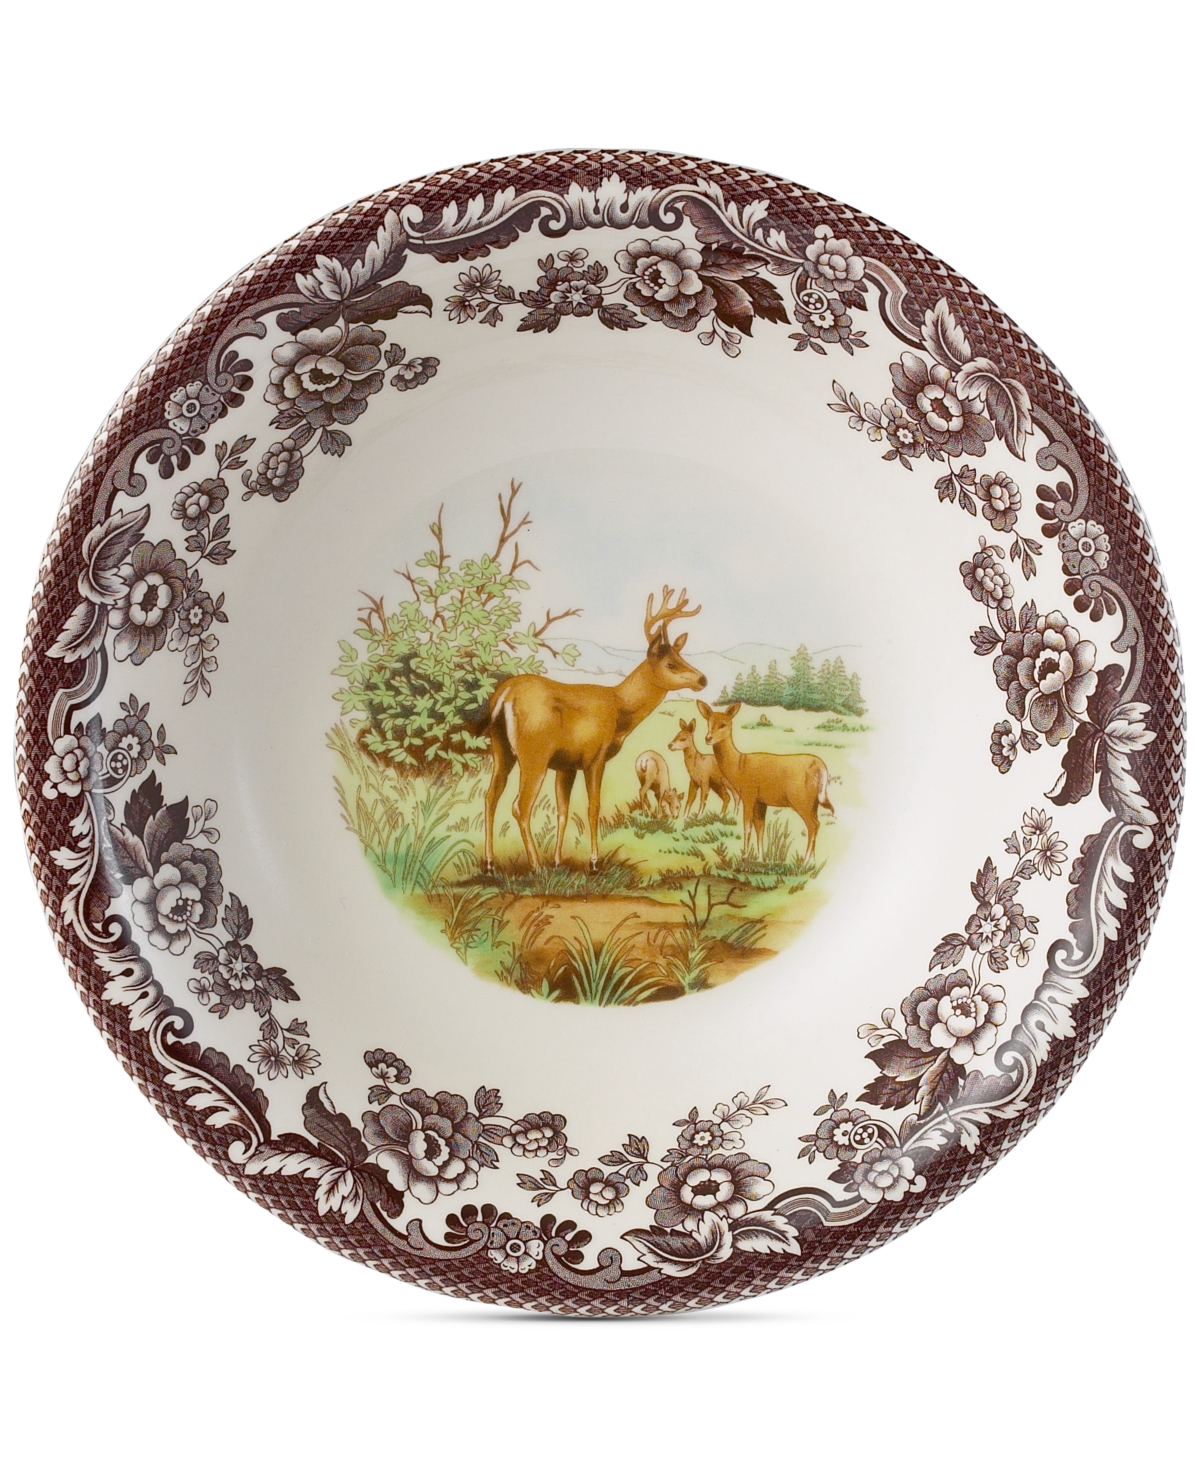 Woodland Cereal Bowl - Brown